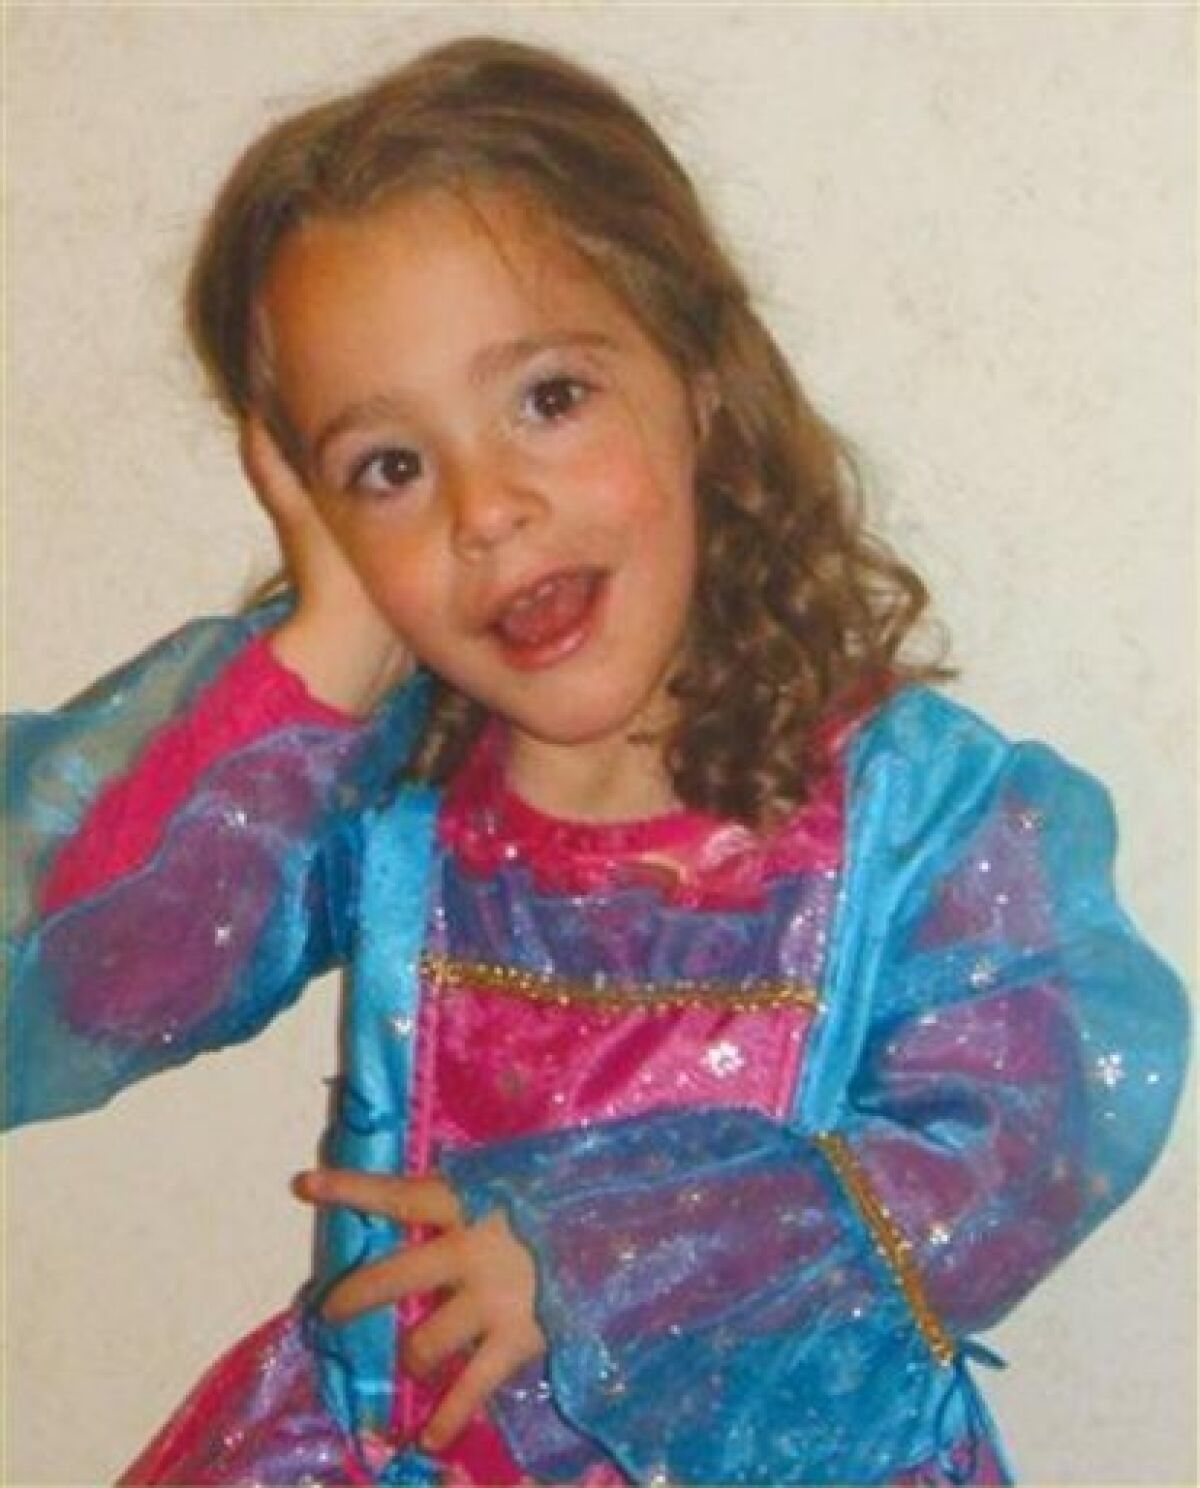 An undated photo of 4-year-old Paulette Gebara Farah whose family reported her missing on the outskirts of Mexico City